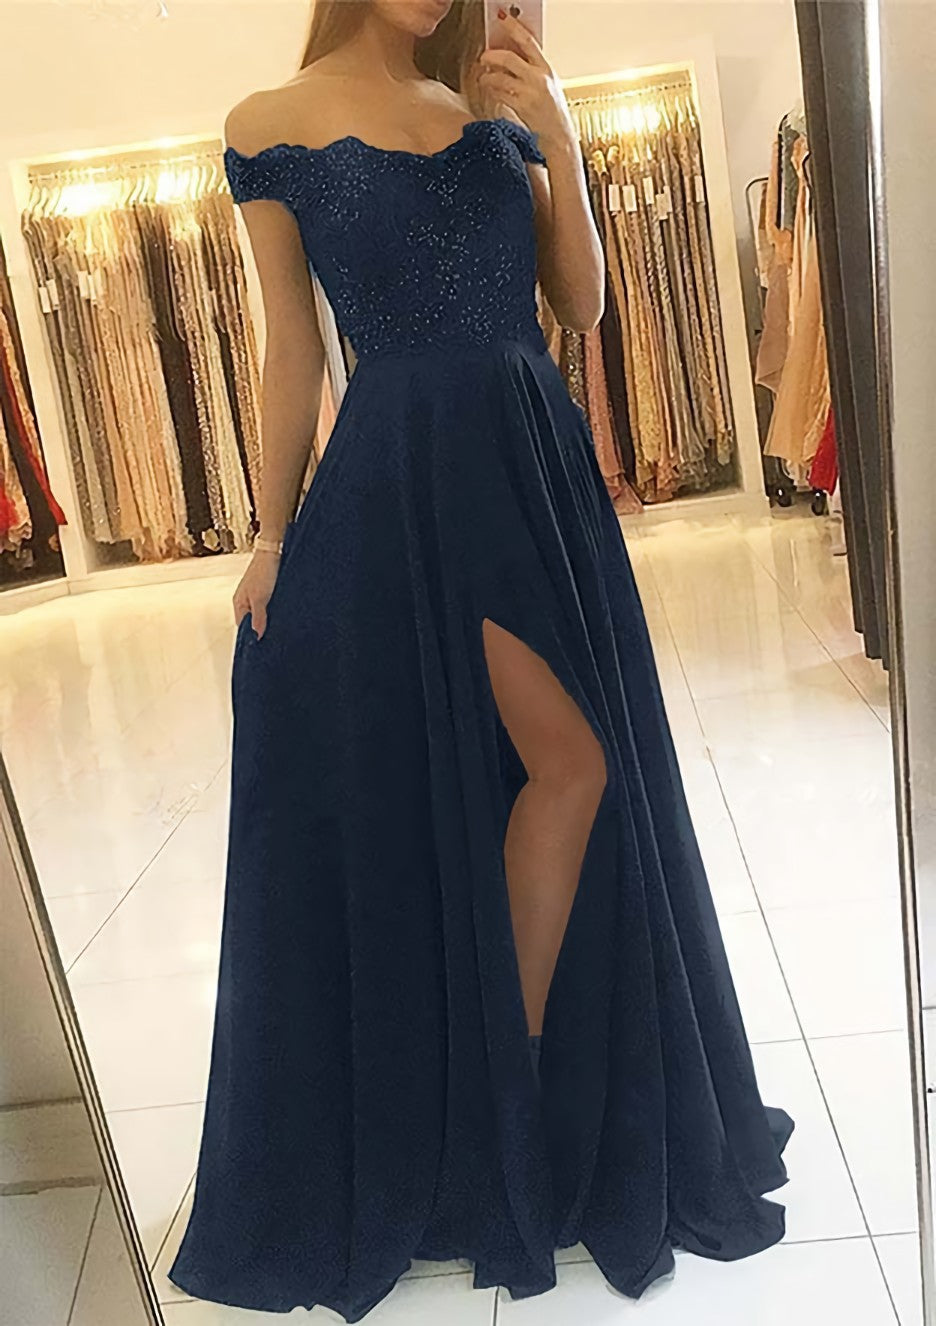 A Line Princess Off The Shoulder Sleeveless Long Floor Length Chiffon Prom Dress Outfits For Women With Beading Split